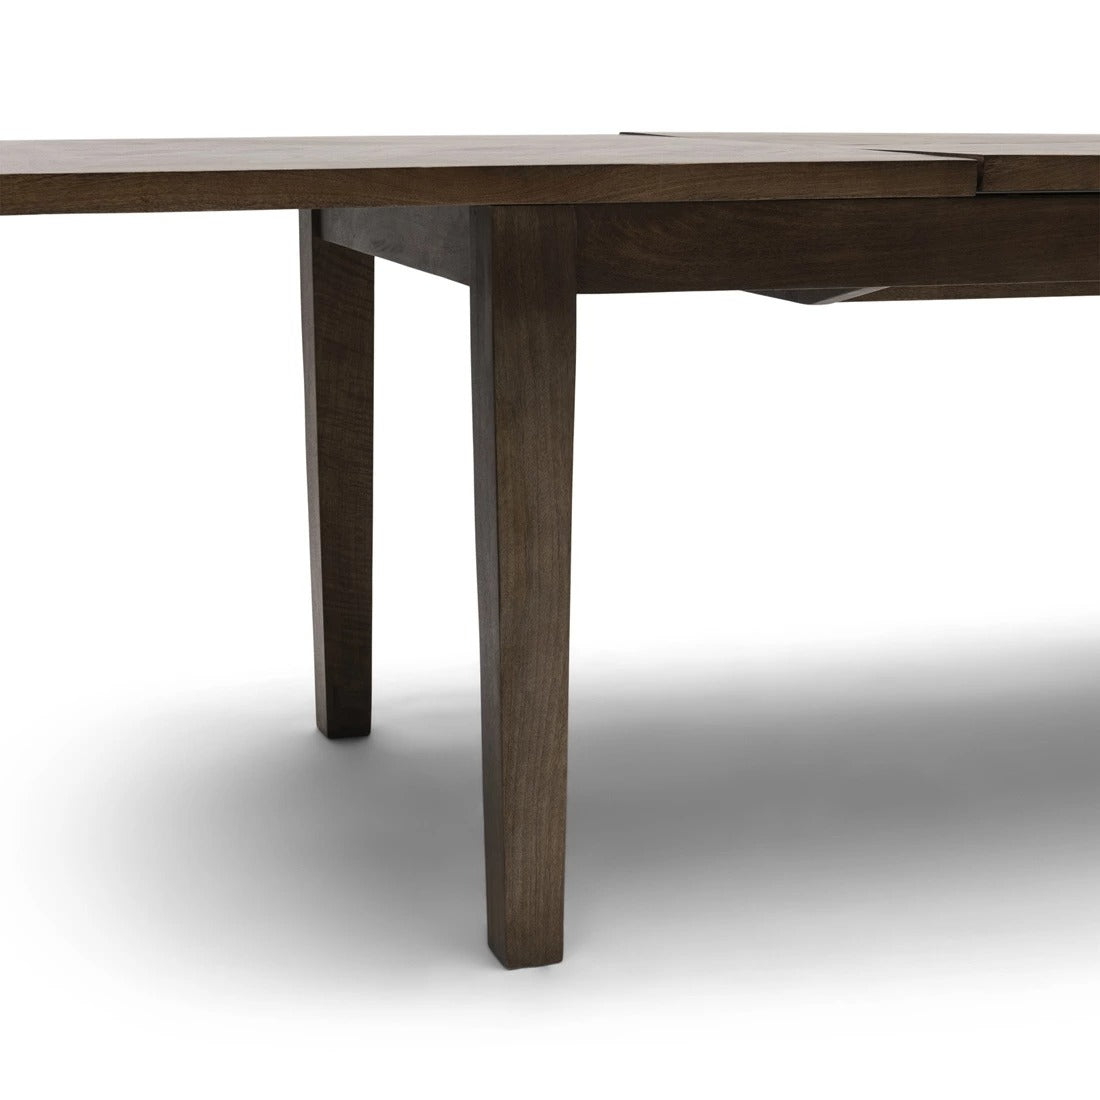 Bodie Hill dining table 180/260x100